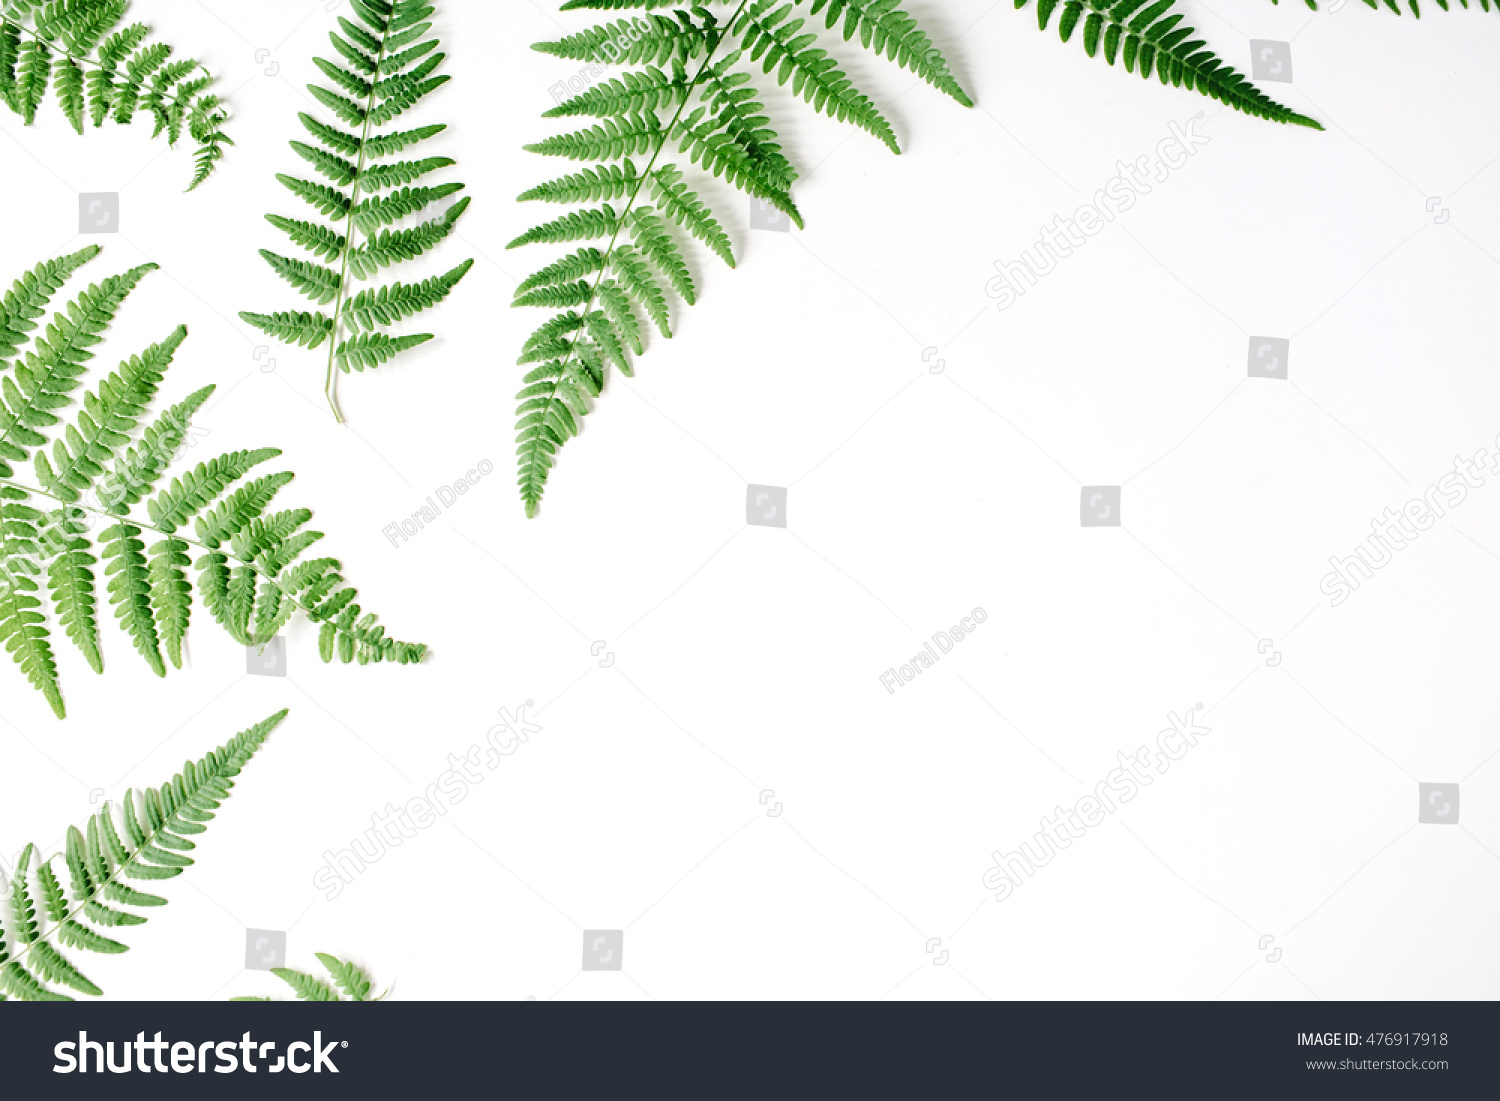 fern branches pattern isolated on white background. flat lay, top view #476917918